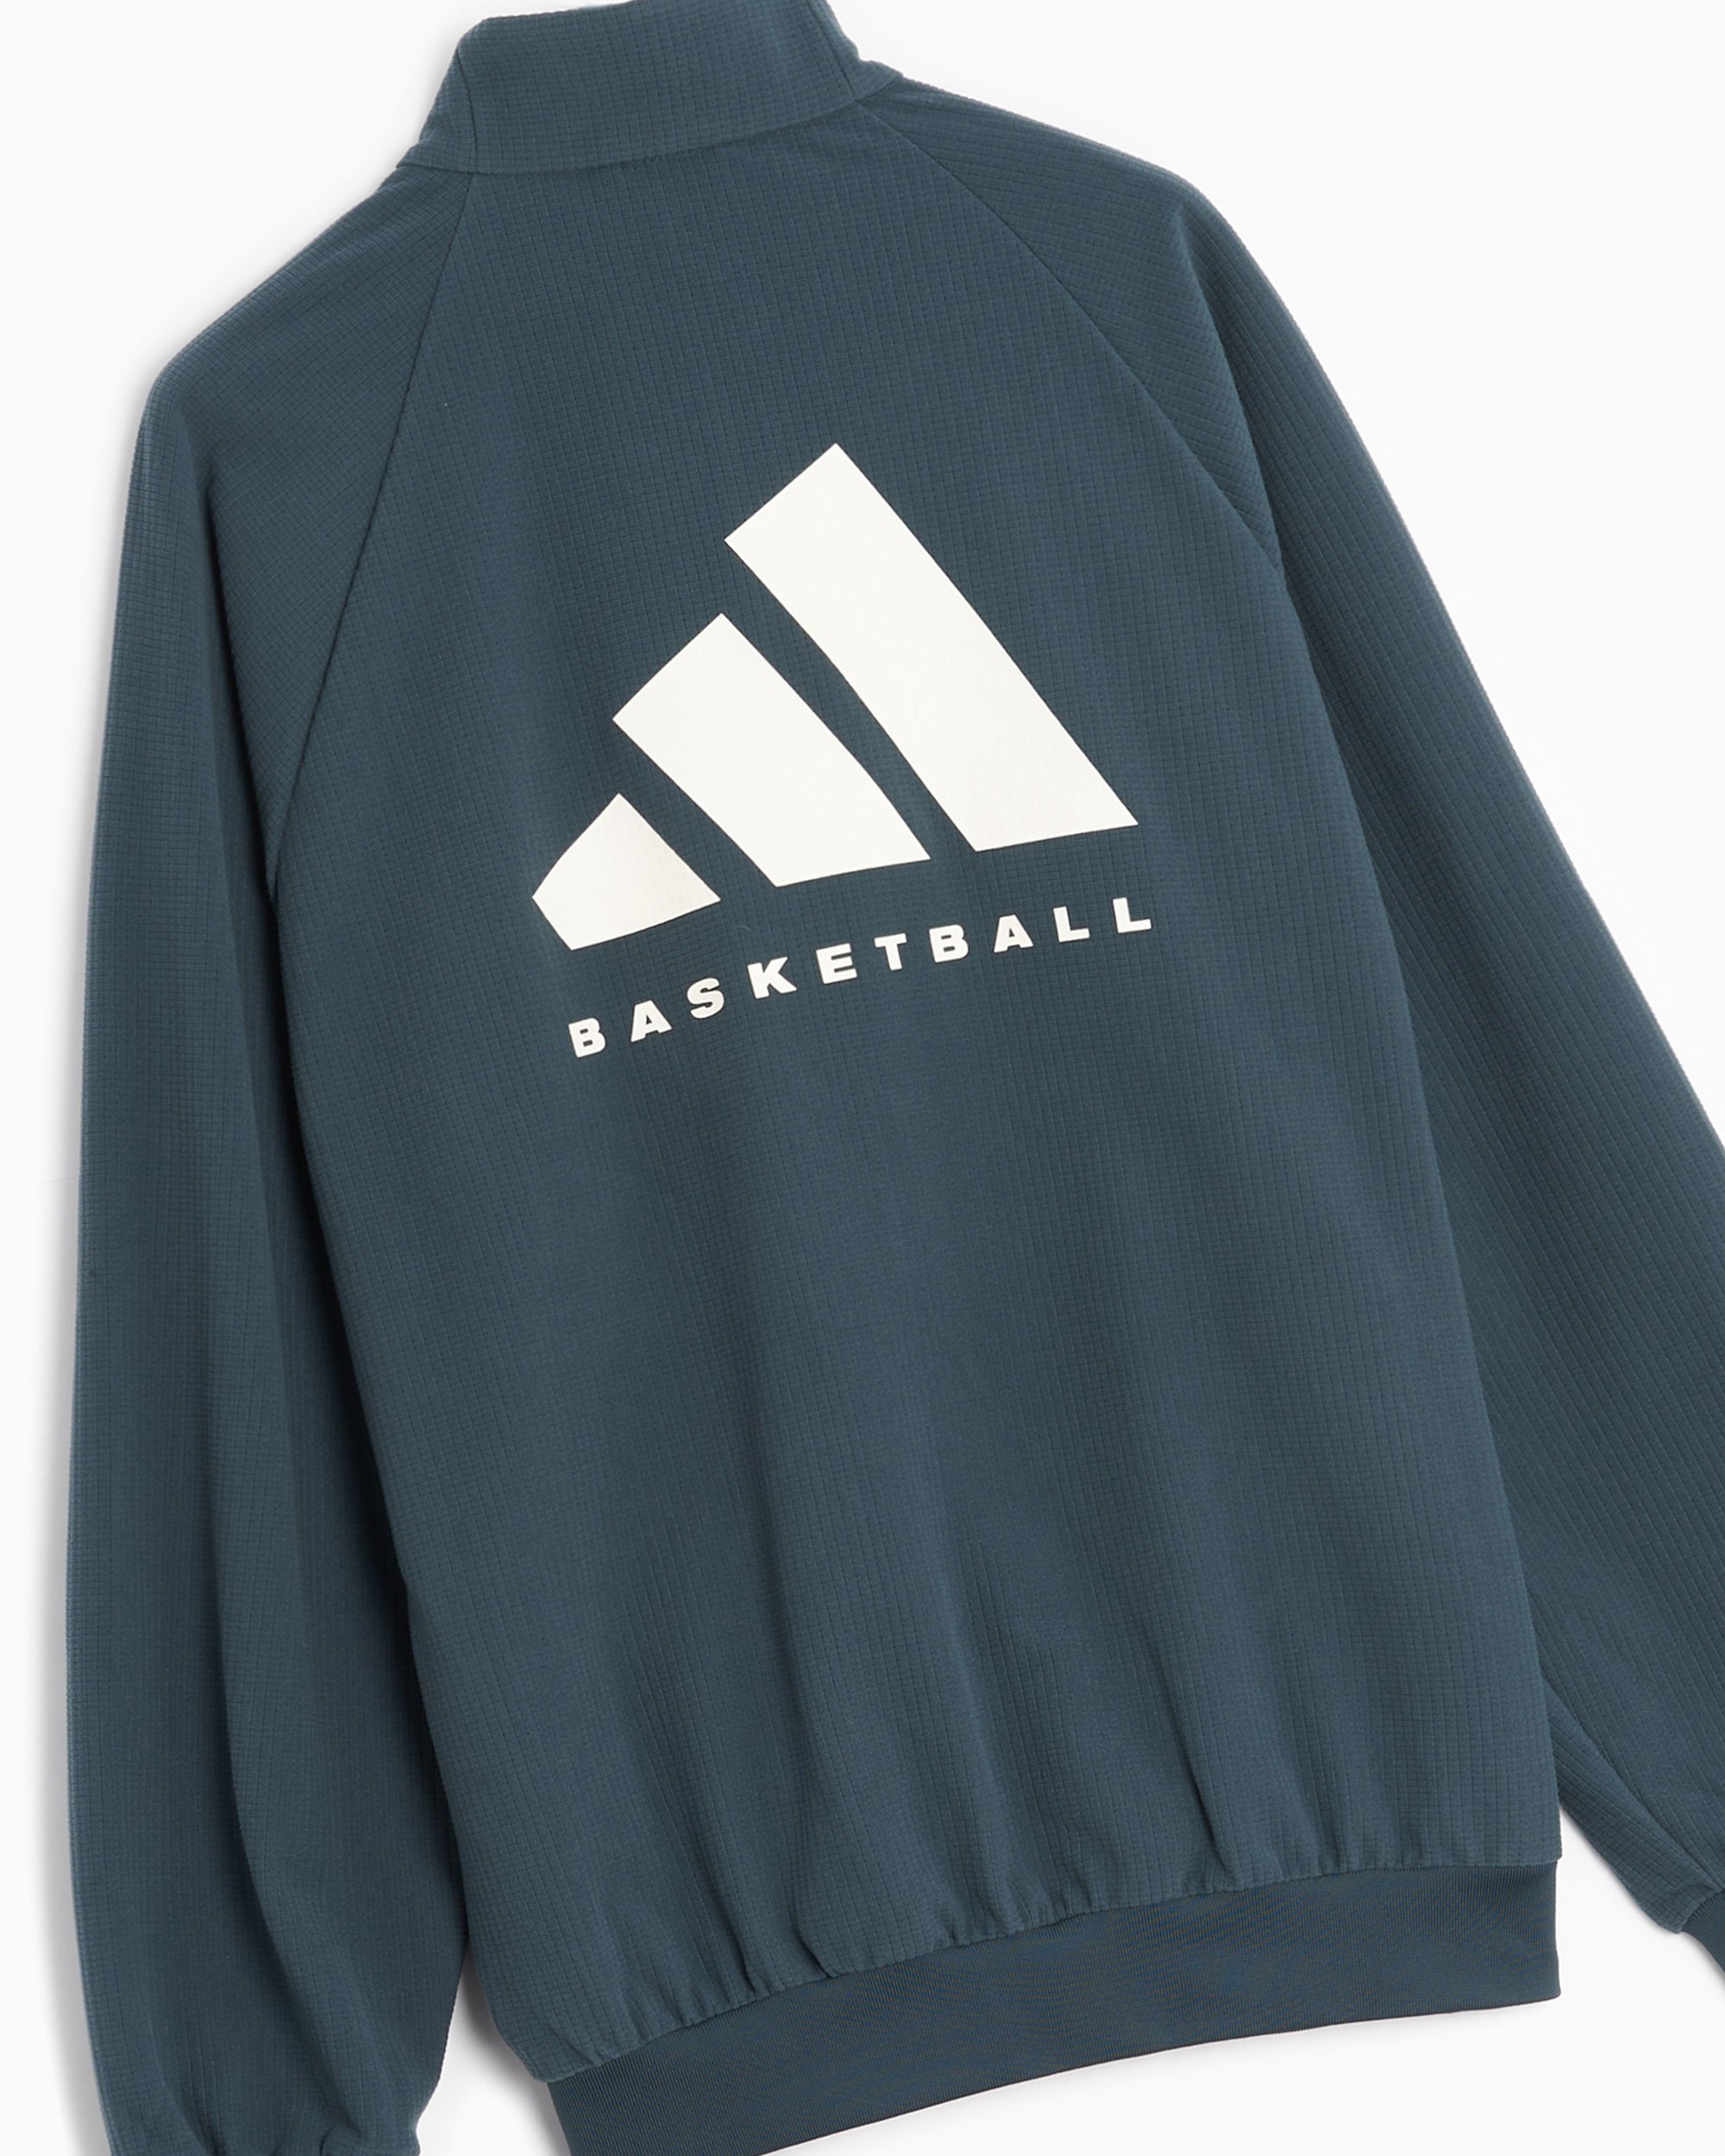 FOOTDISTRICT Performance Green One Unisex Basketball Online Buy Jacket at Track IT2470| adidas